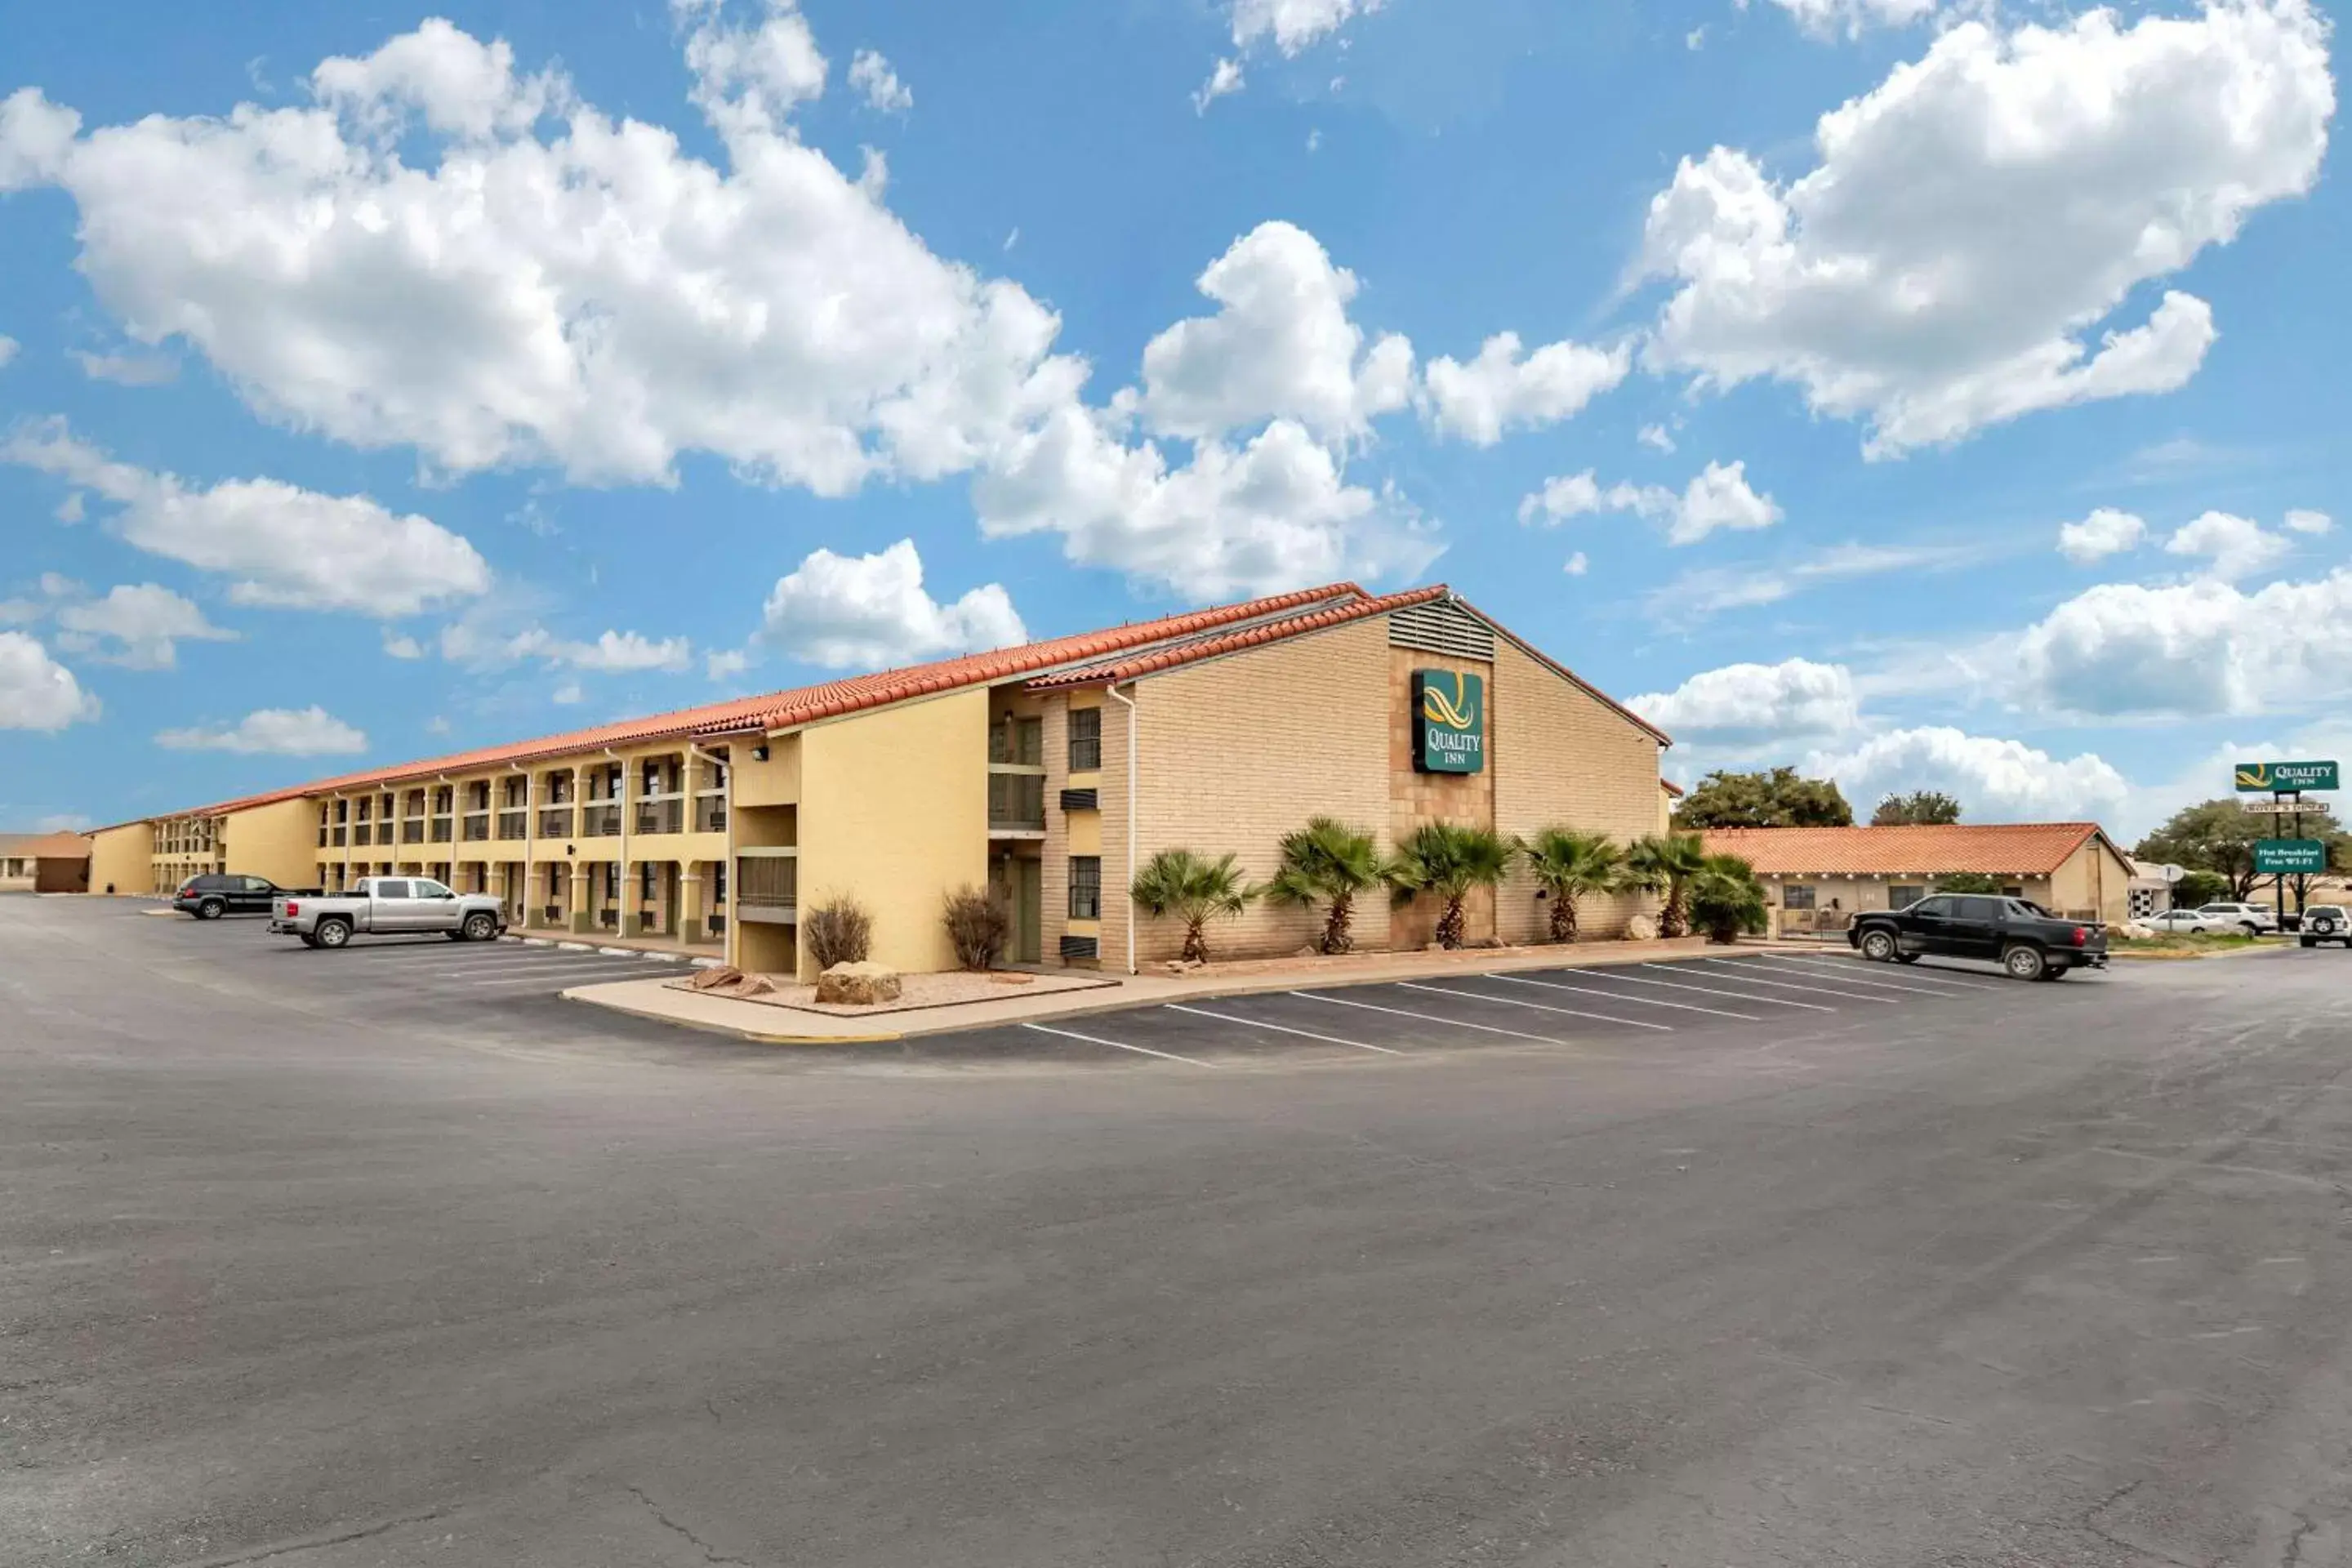 Property Building in Quality Inn San Angelo